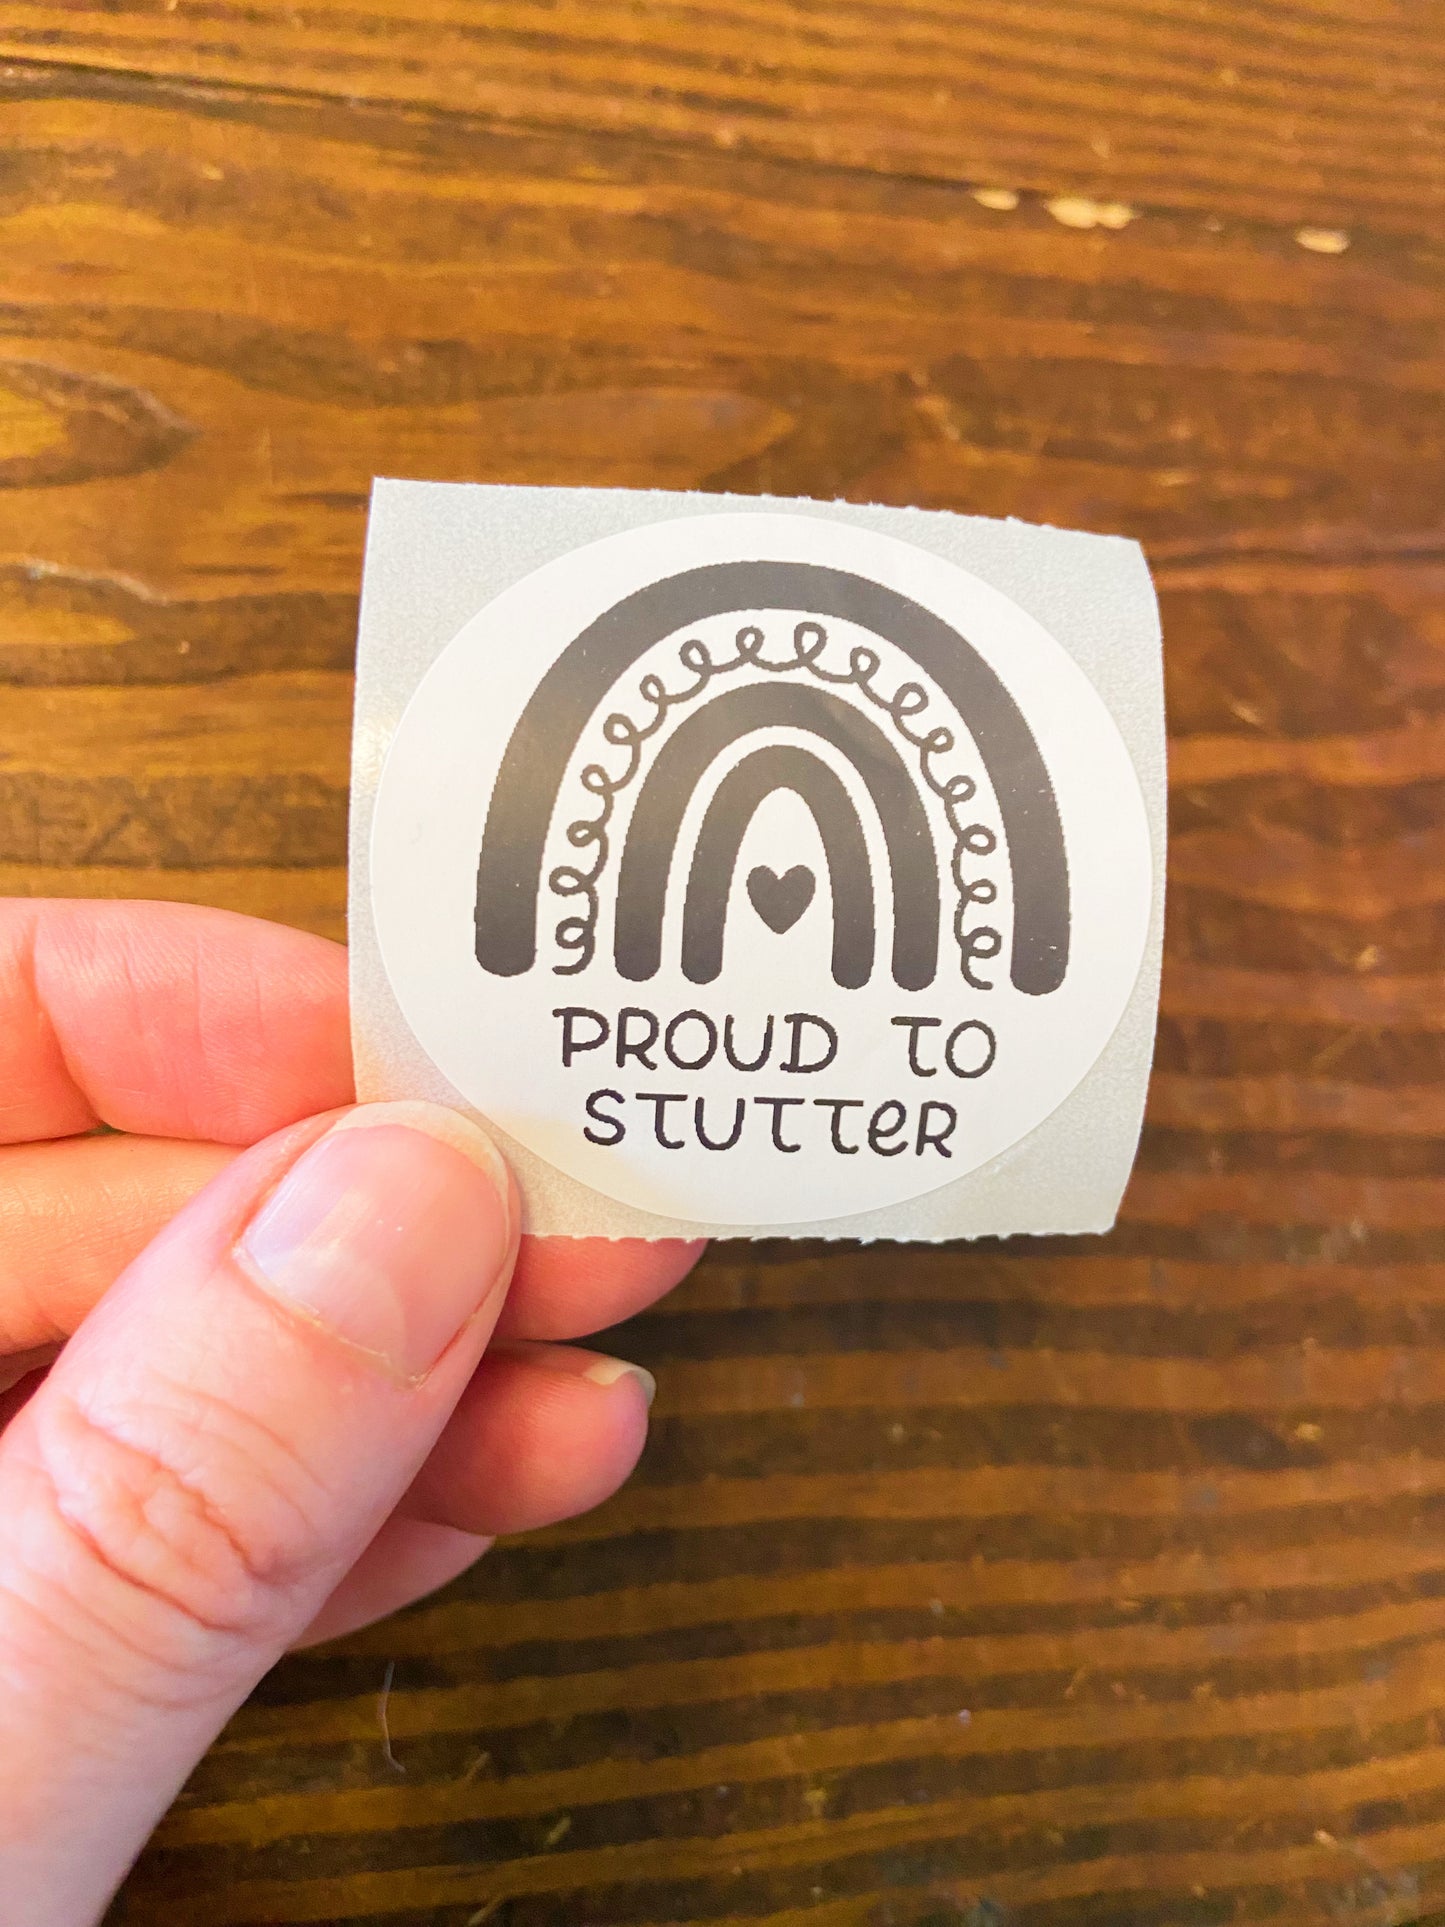 Stuttering Sticker Set for Chapter Leaders and SLPs